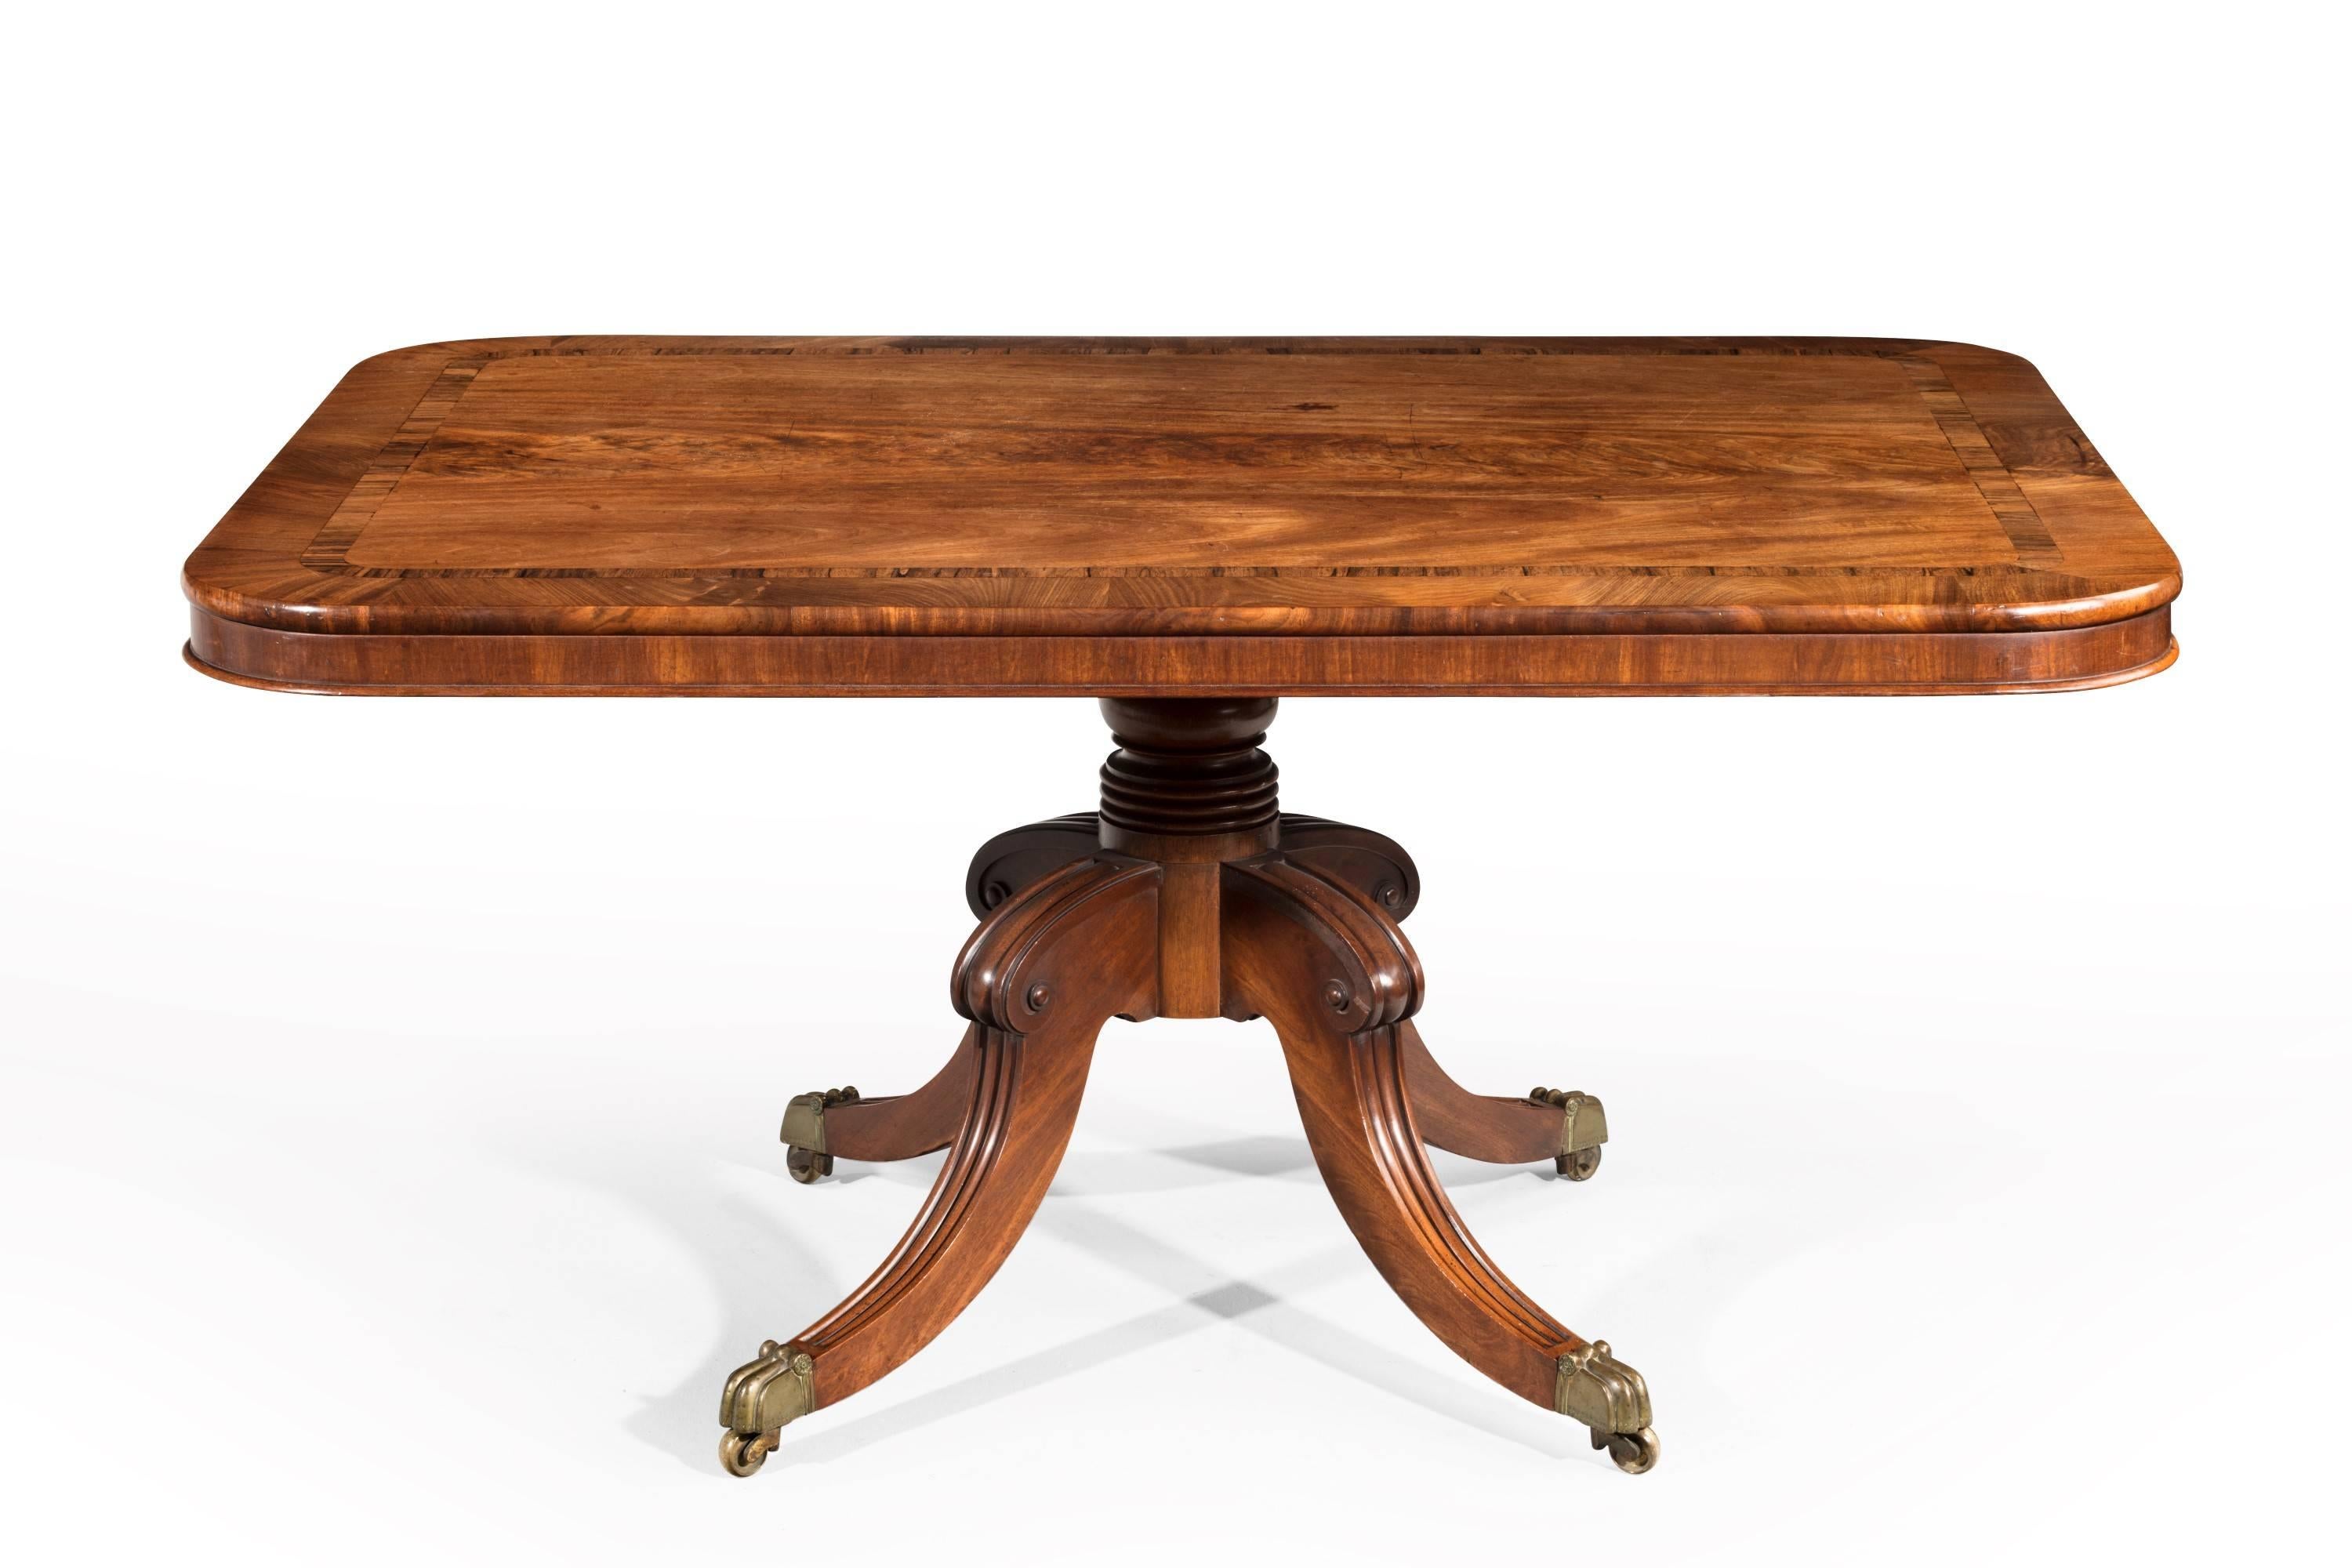 English Regency Period Dining Table